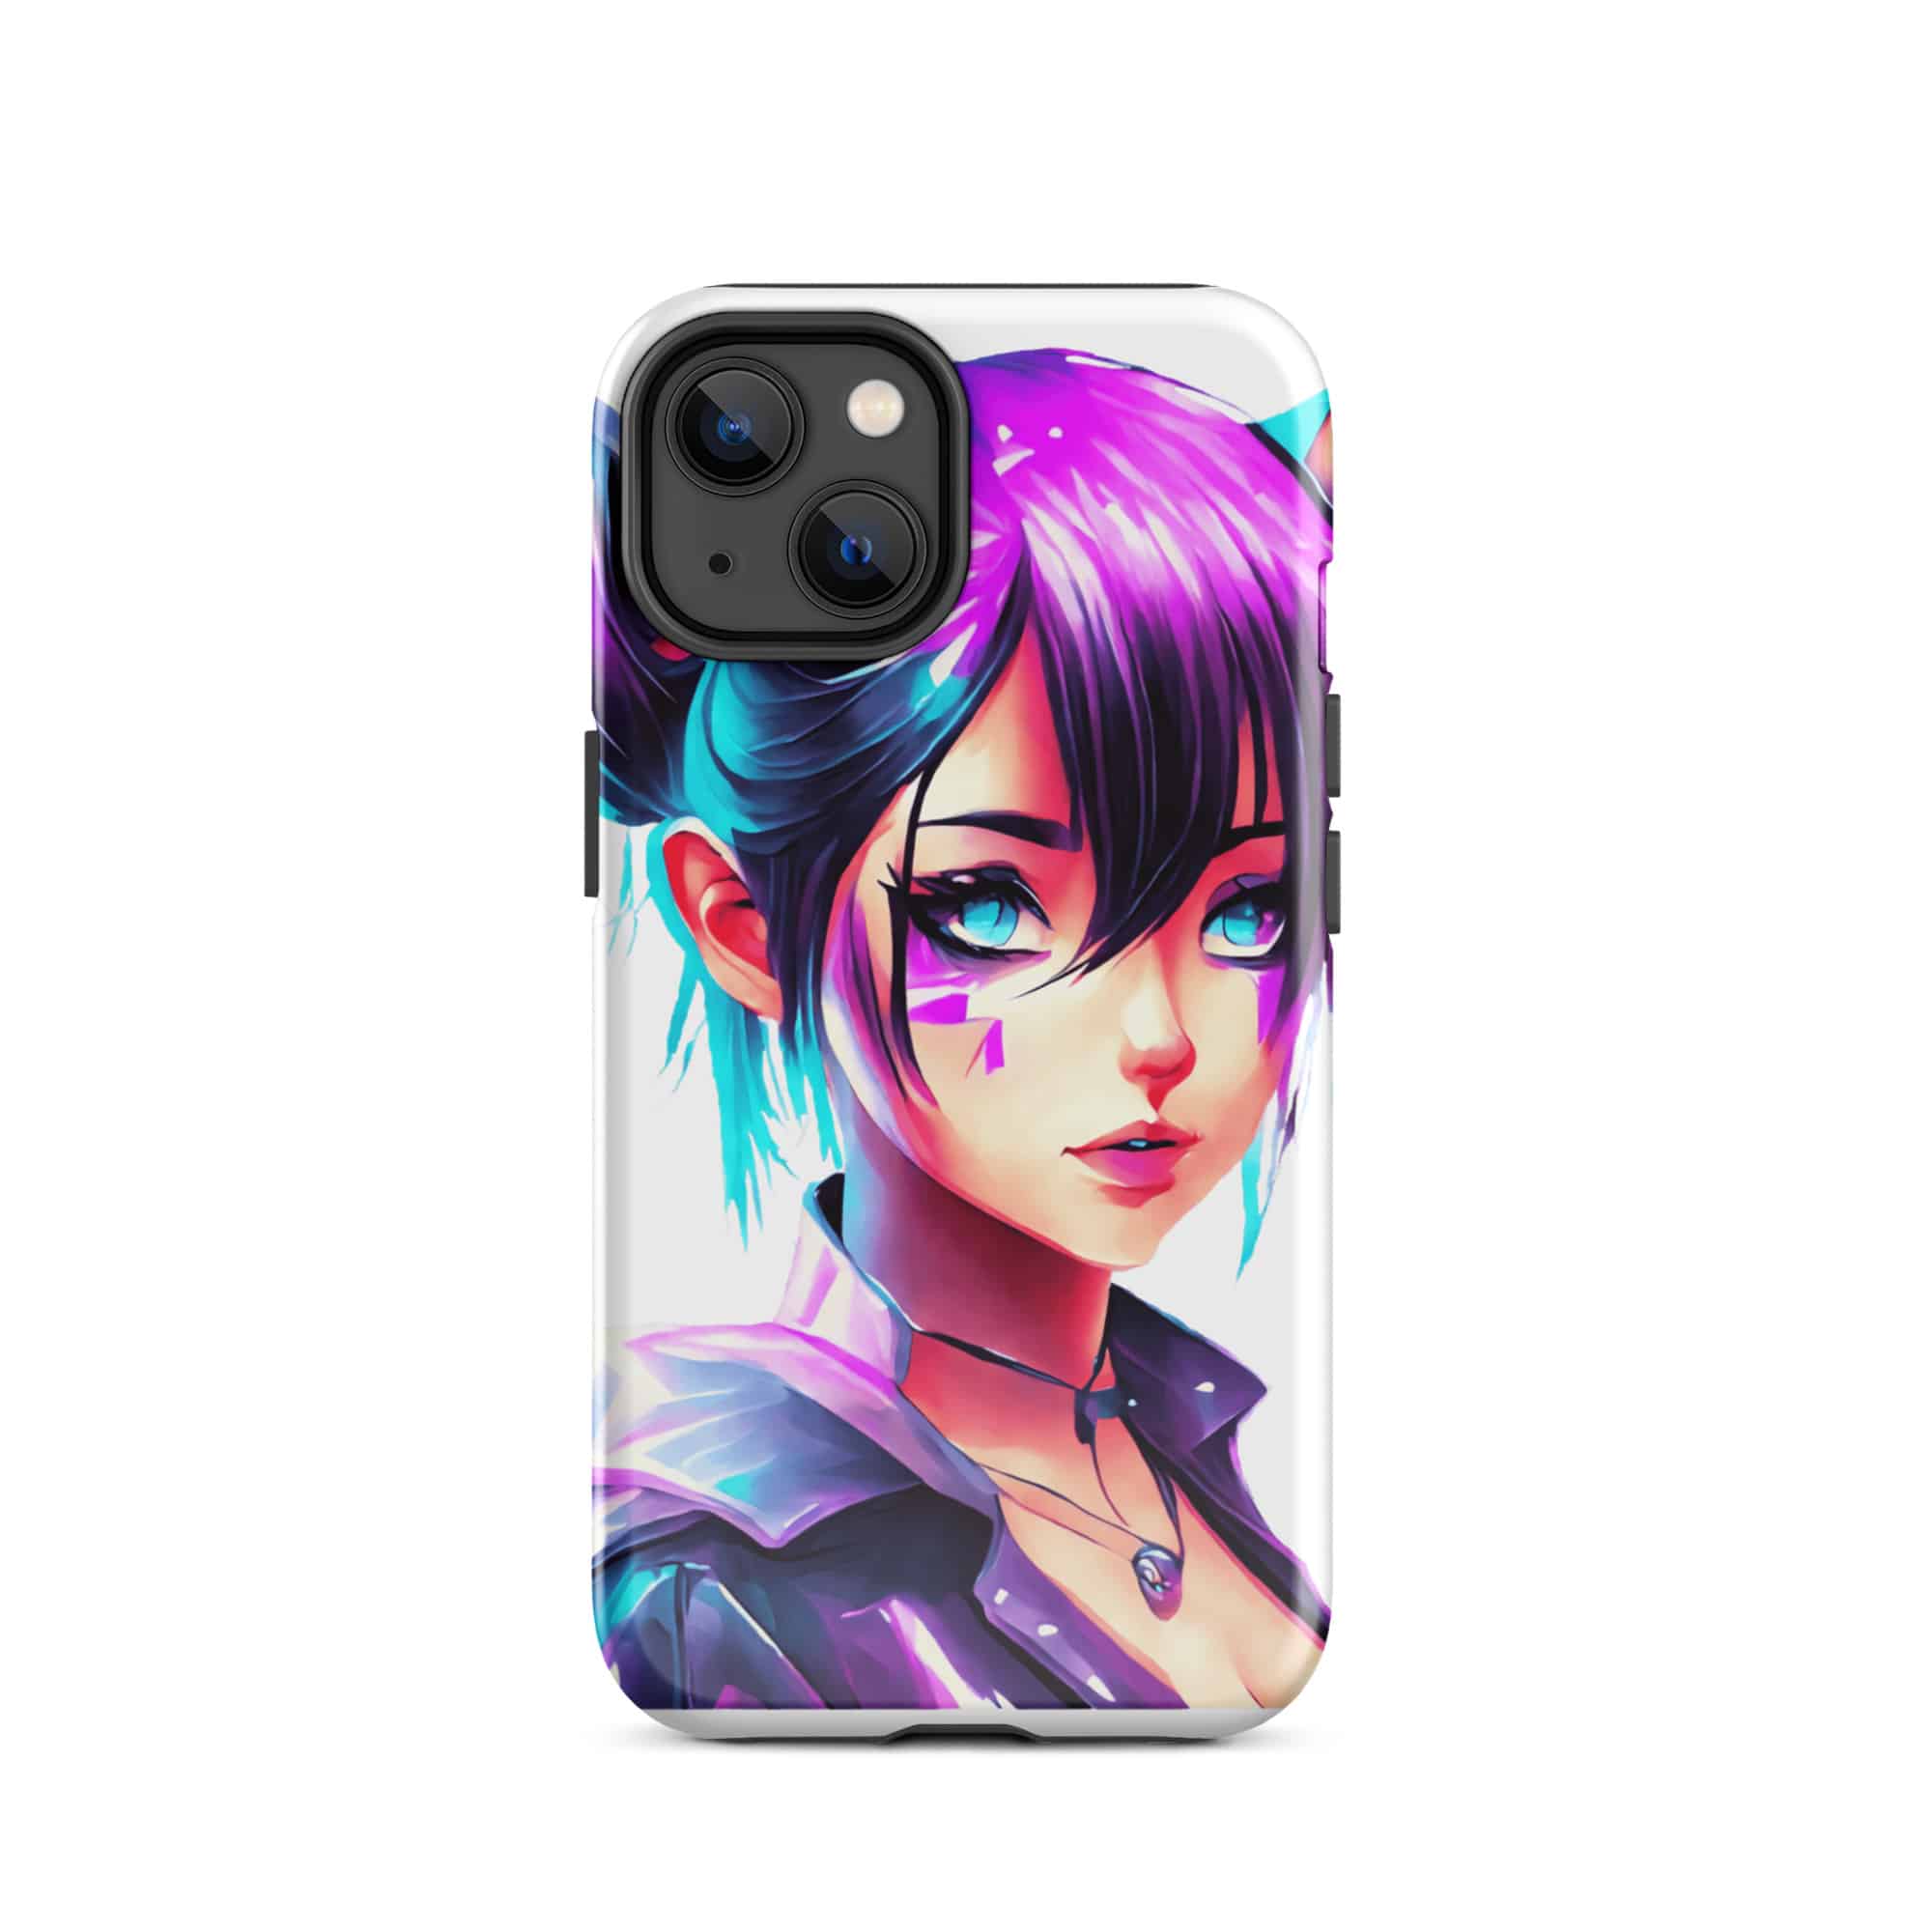 Anime Girl Tough Case for iPhone 14 and 14 Pro Video game store Gaming merchandise Gaming accessories shop Online gaming store Video game shop near me Gaming console store PC gaming store Gaming gear shop Retro gaming shop Board game shop Anime merchandise Anime store online Japanese anime shop Anime figurines Manga shop Anime DVDs Anime accessories Anime apparel Anime collectibles Anime gifts